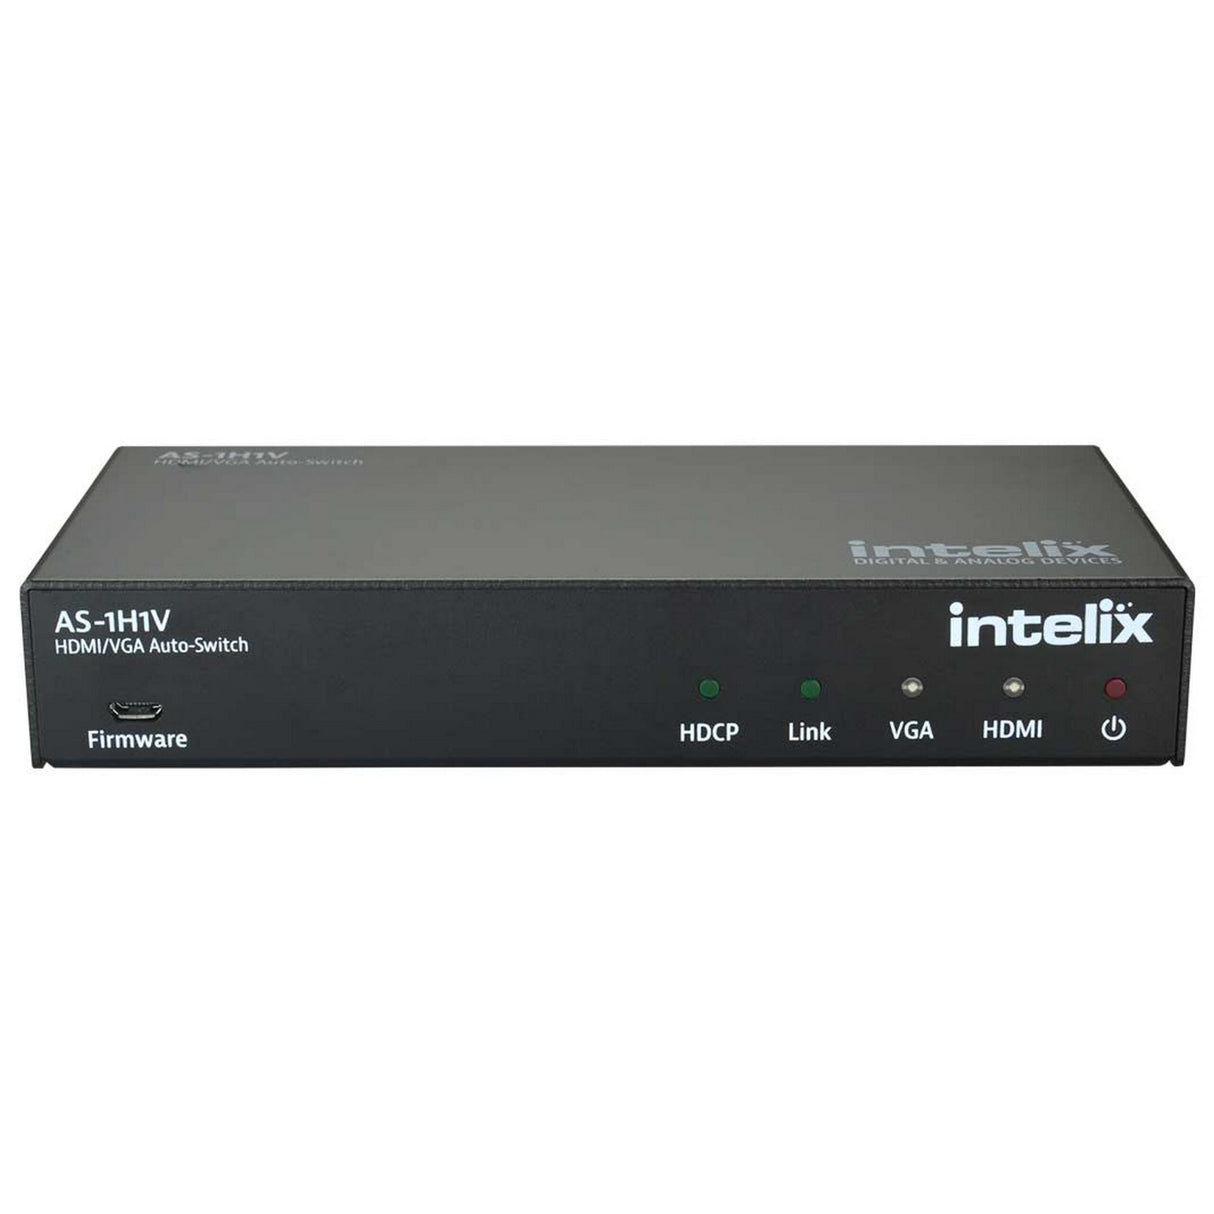 Intelix AS-1H1V HDMI/VGA Auto-Switcher with VGA Scaling, HDMI and HDBaseT Output